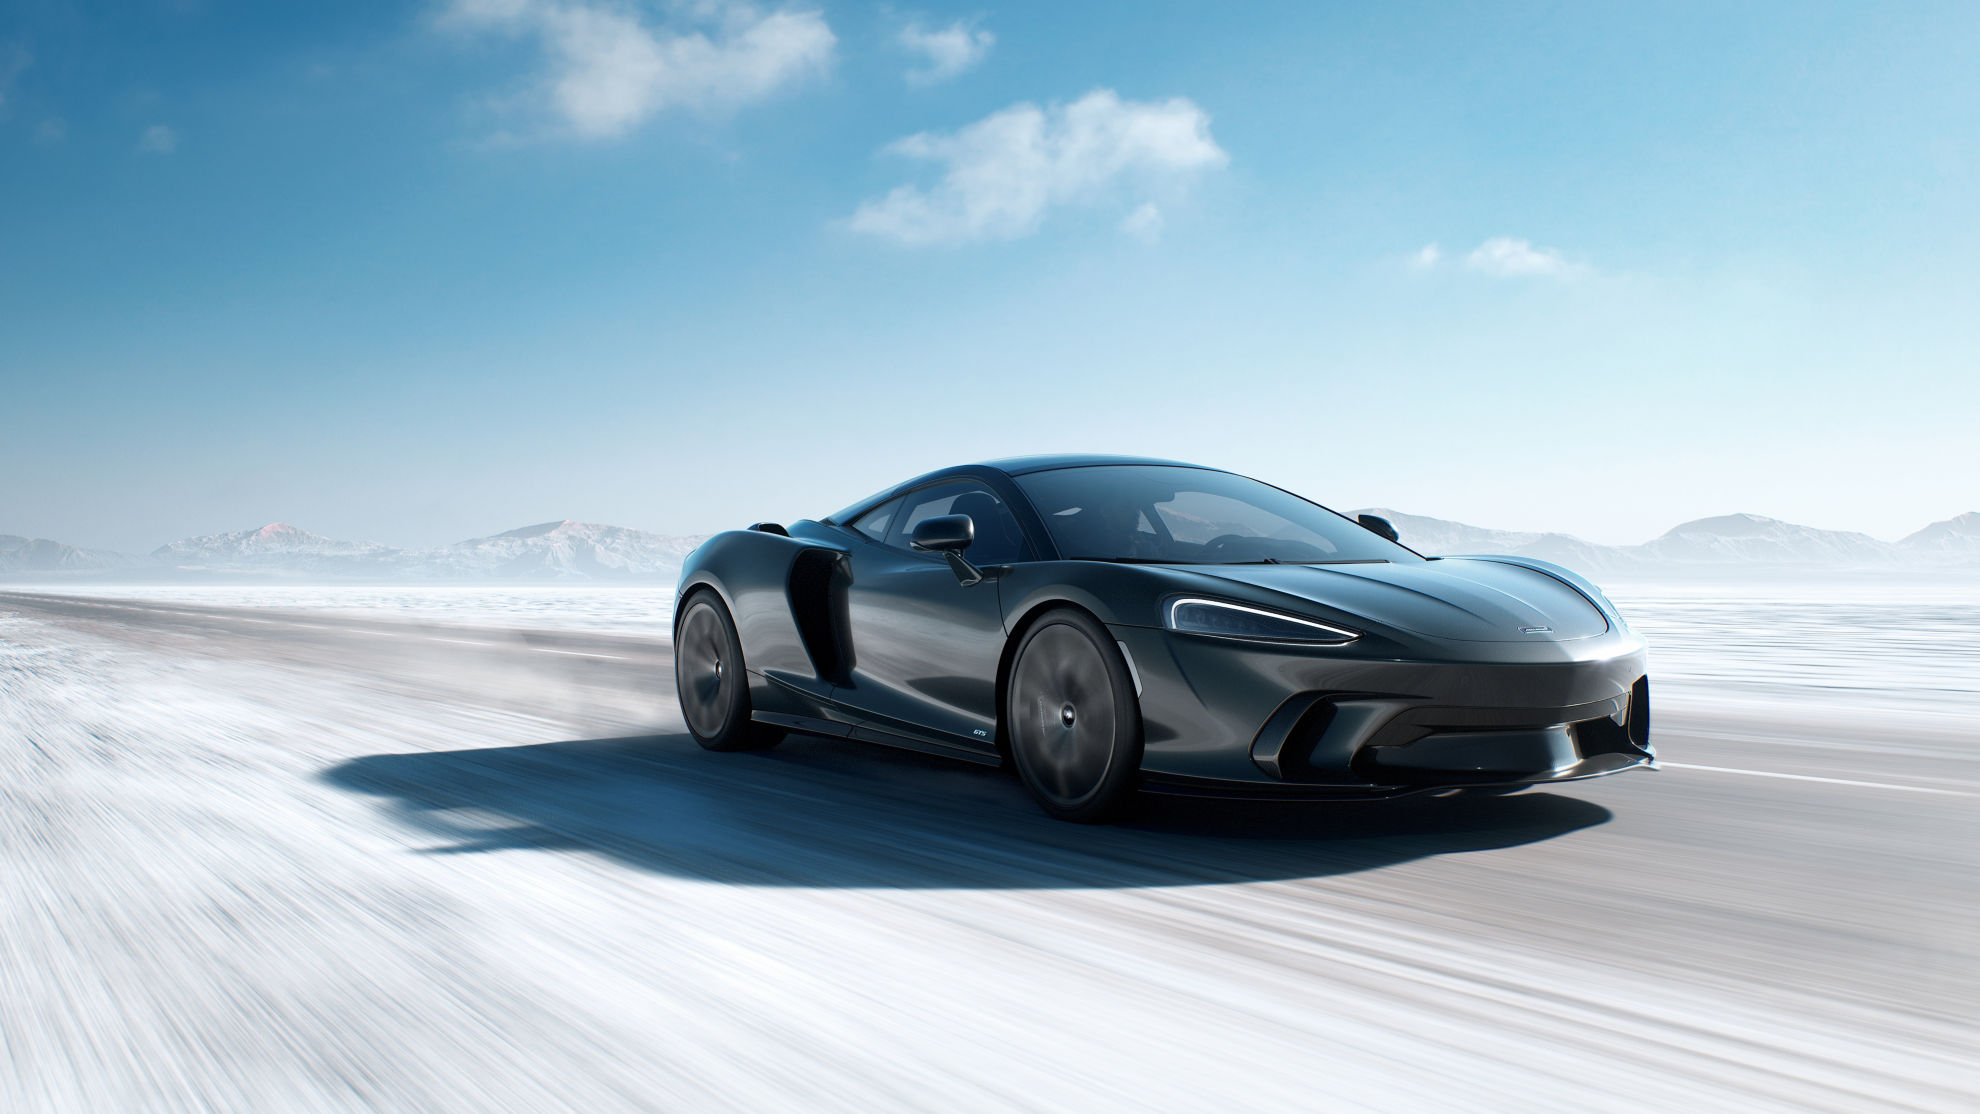 McLaren Automotive - The Most Exhilarating Driving Experience